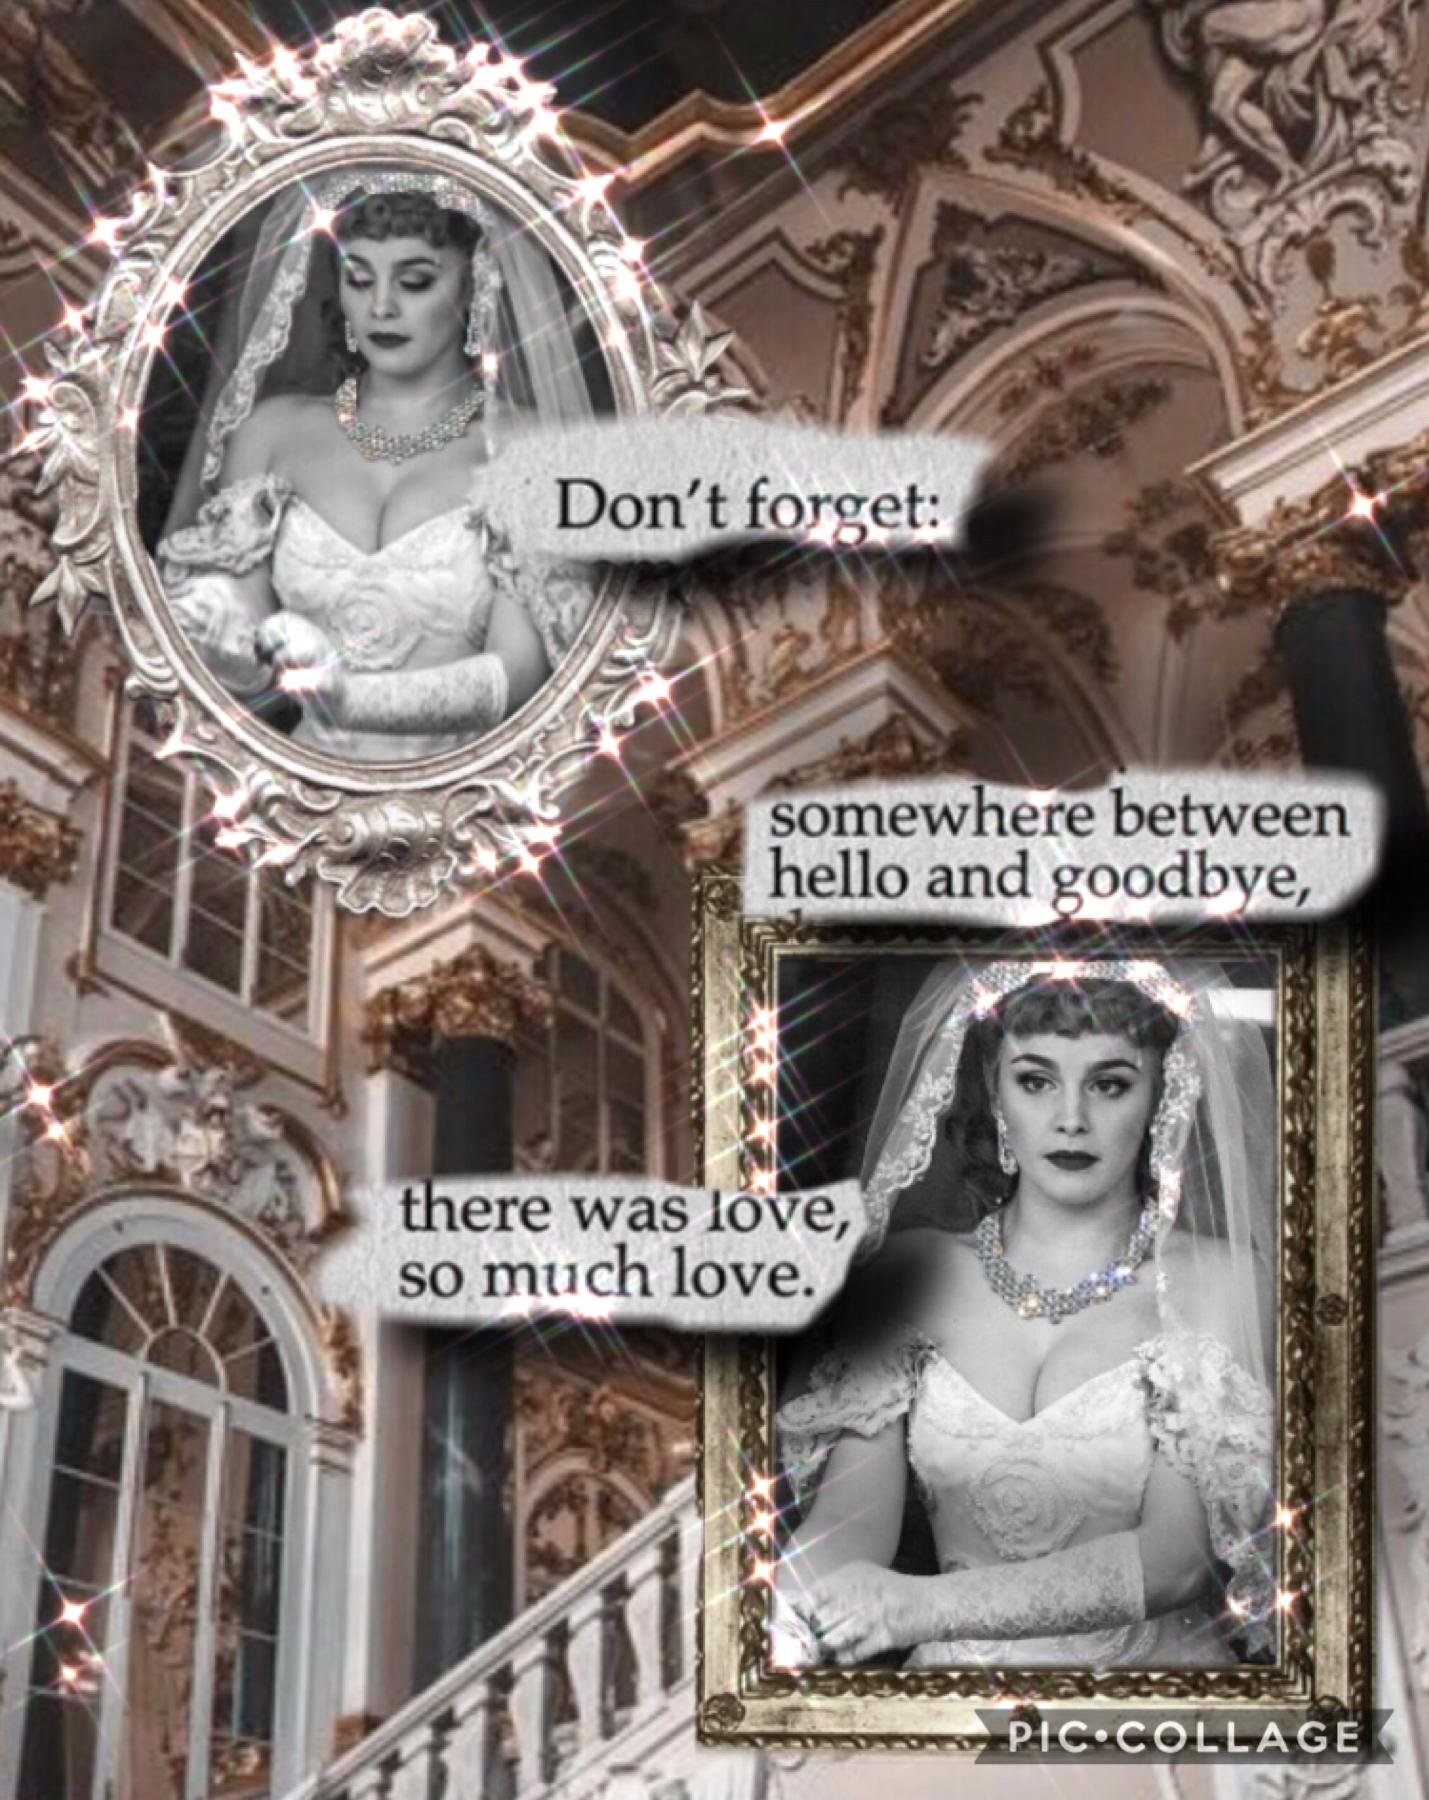 14th April 2020
A fancy edit featuring my spirit animal Millie O’Connell who kinda looks like Lucille Ball in this picture ngl